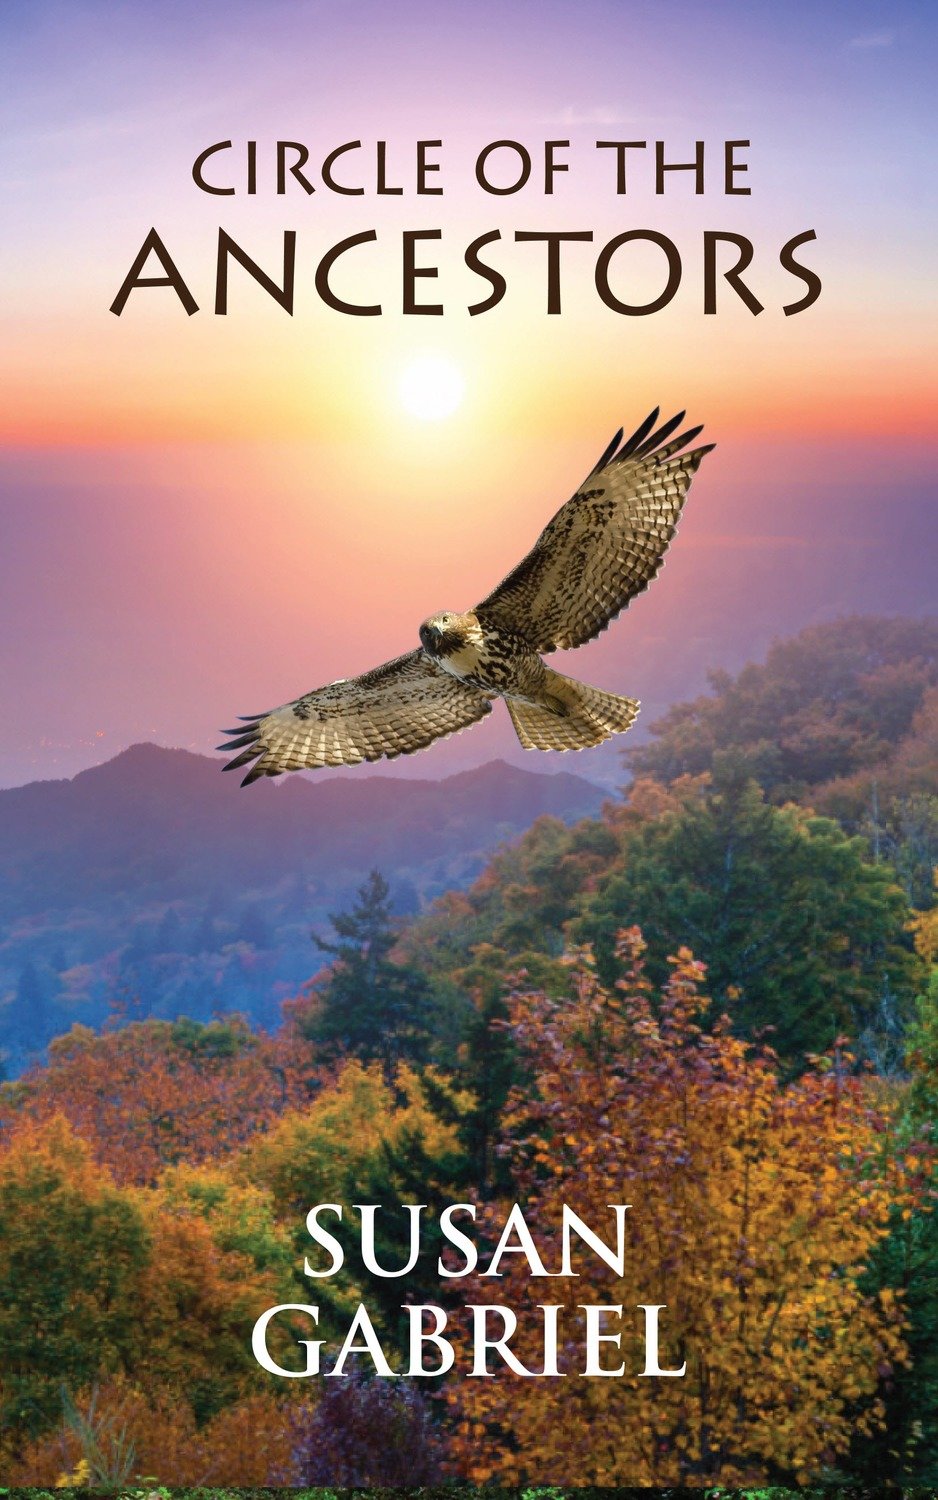 Circle of the Ancestors - paperback, autographed by author